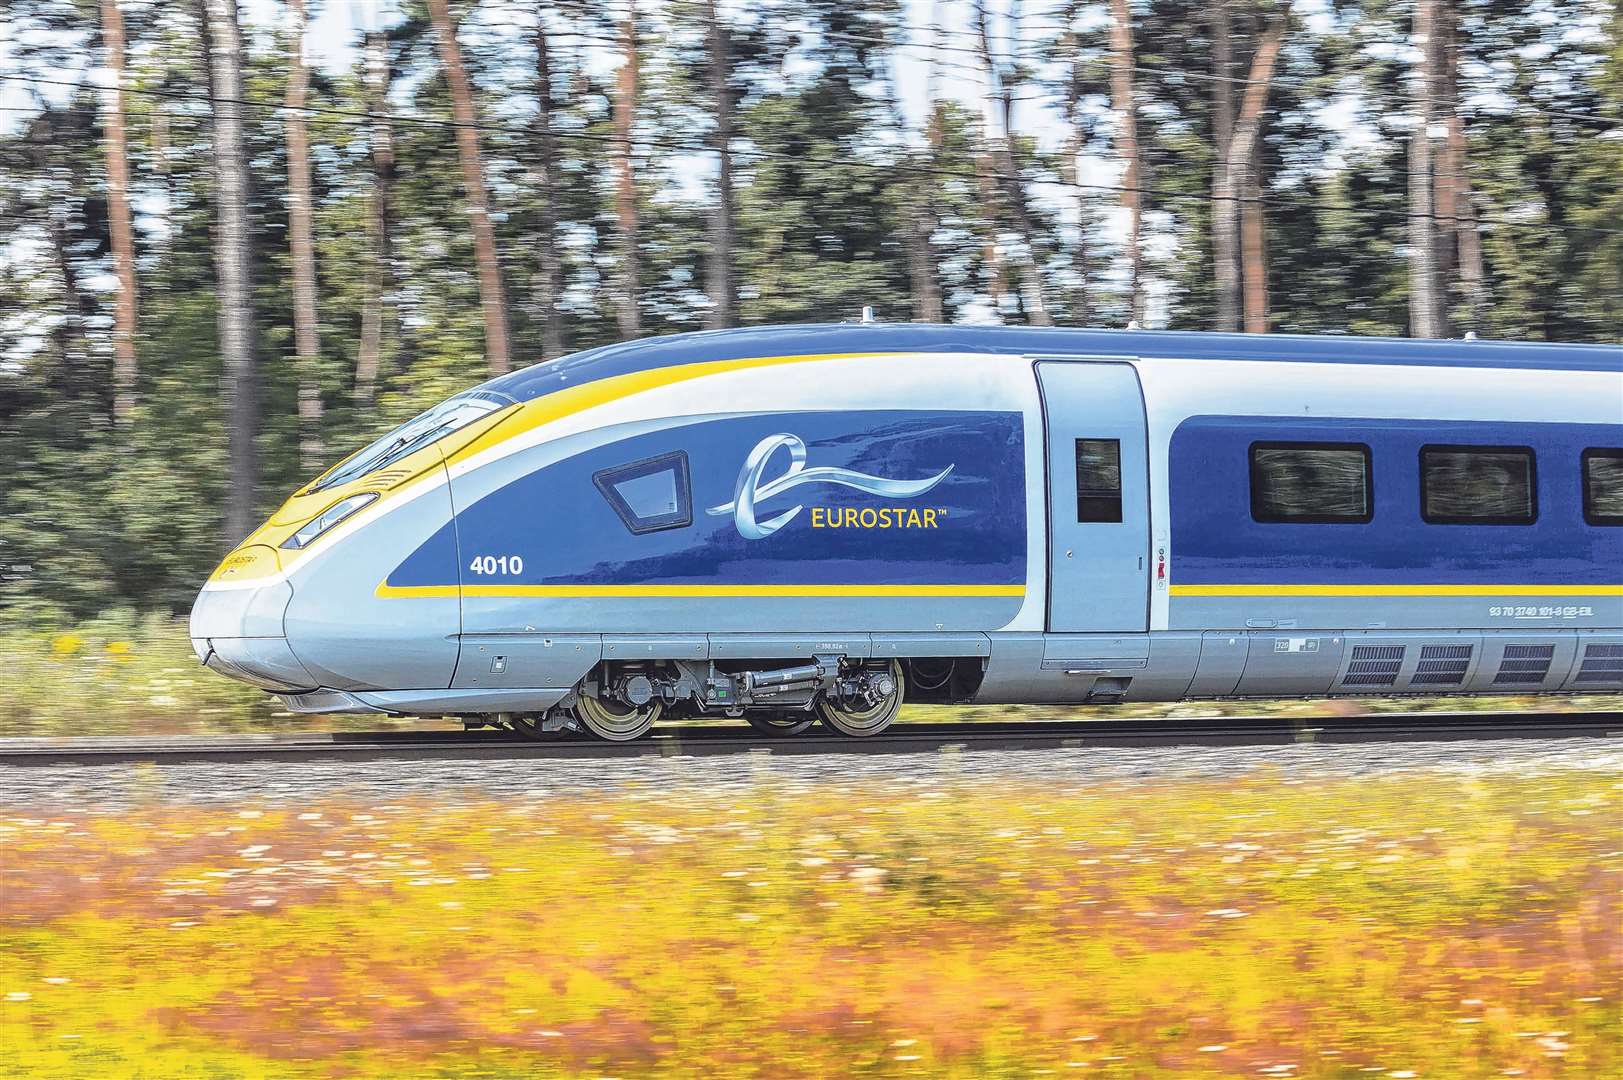 Eurostar, which pays Eurotunnel to use the Channel Tunnel, has seen the pandemic decimate its services to the continent